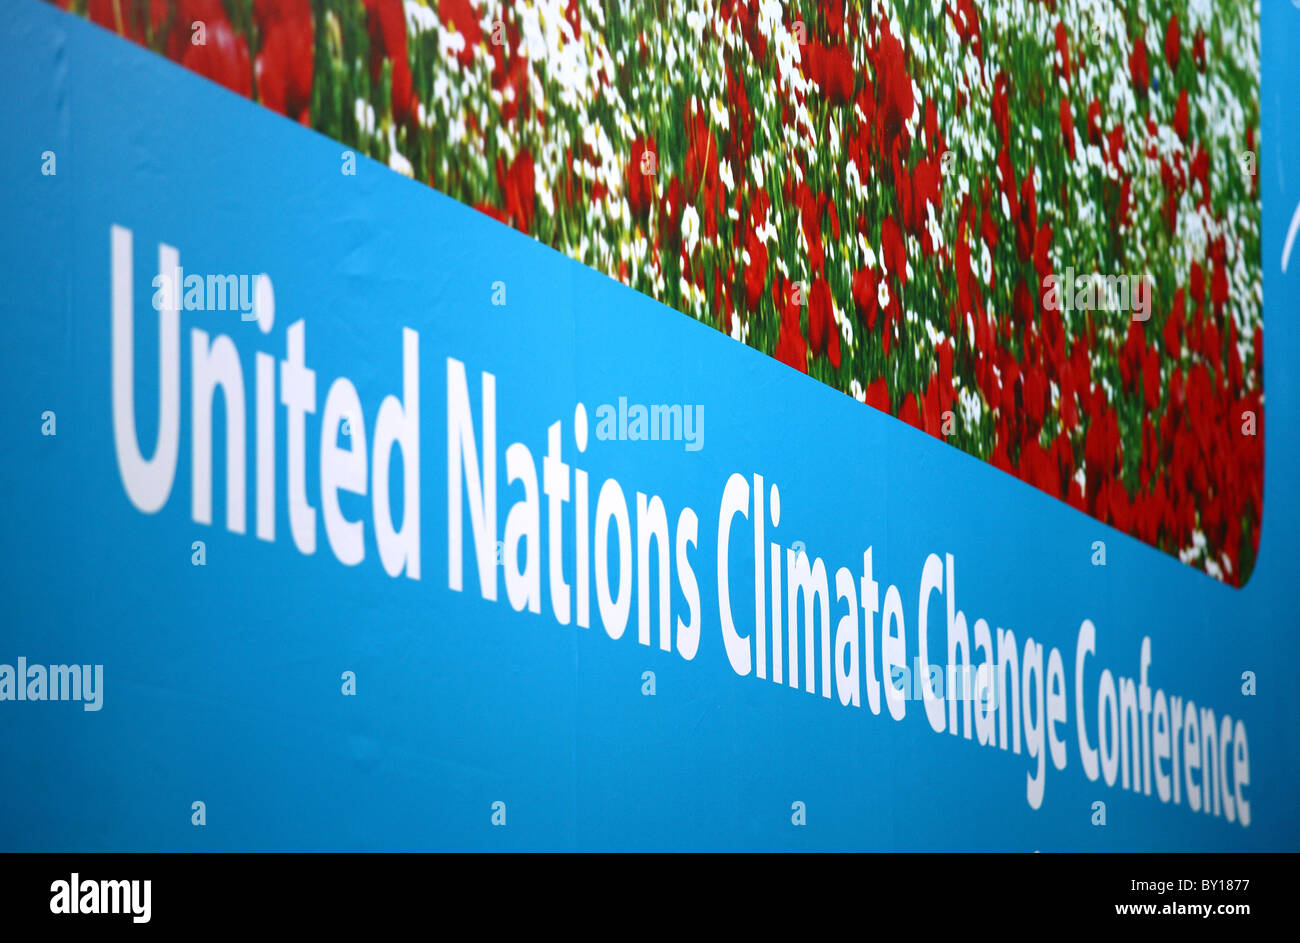 United Nations Climate Change Conference, Poznan, Poland Stock Photo